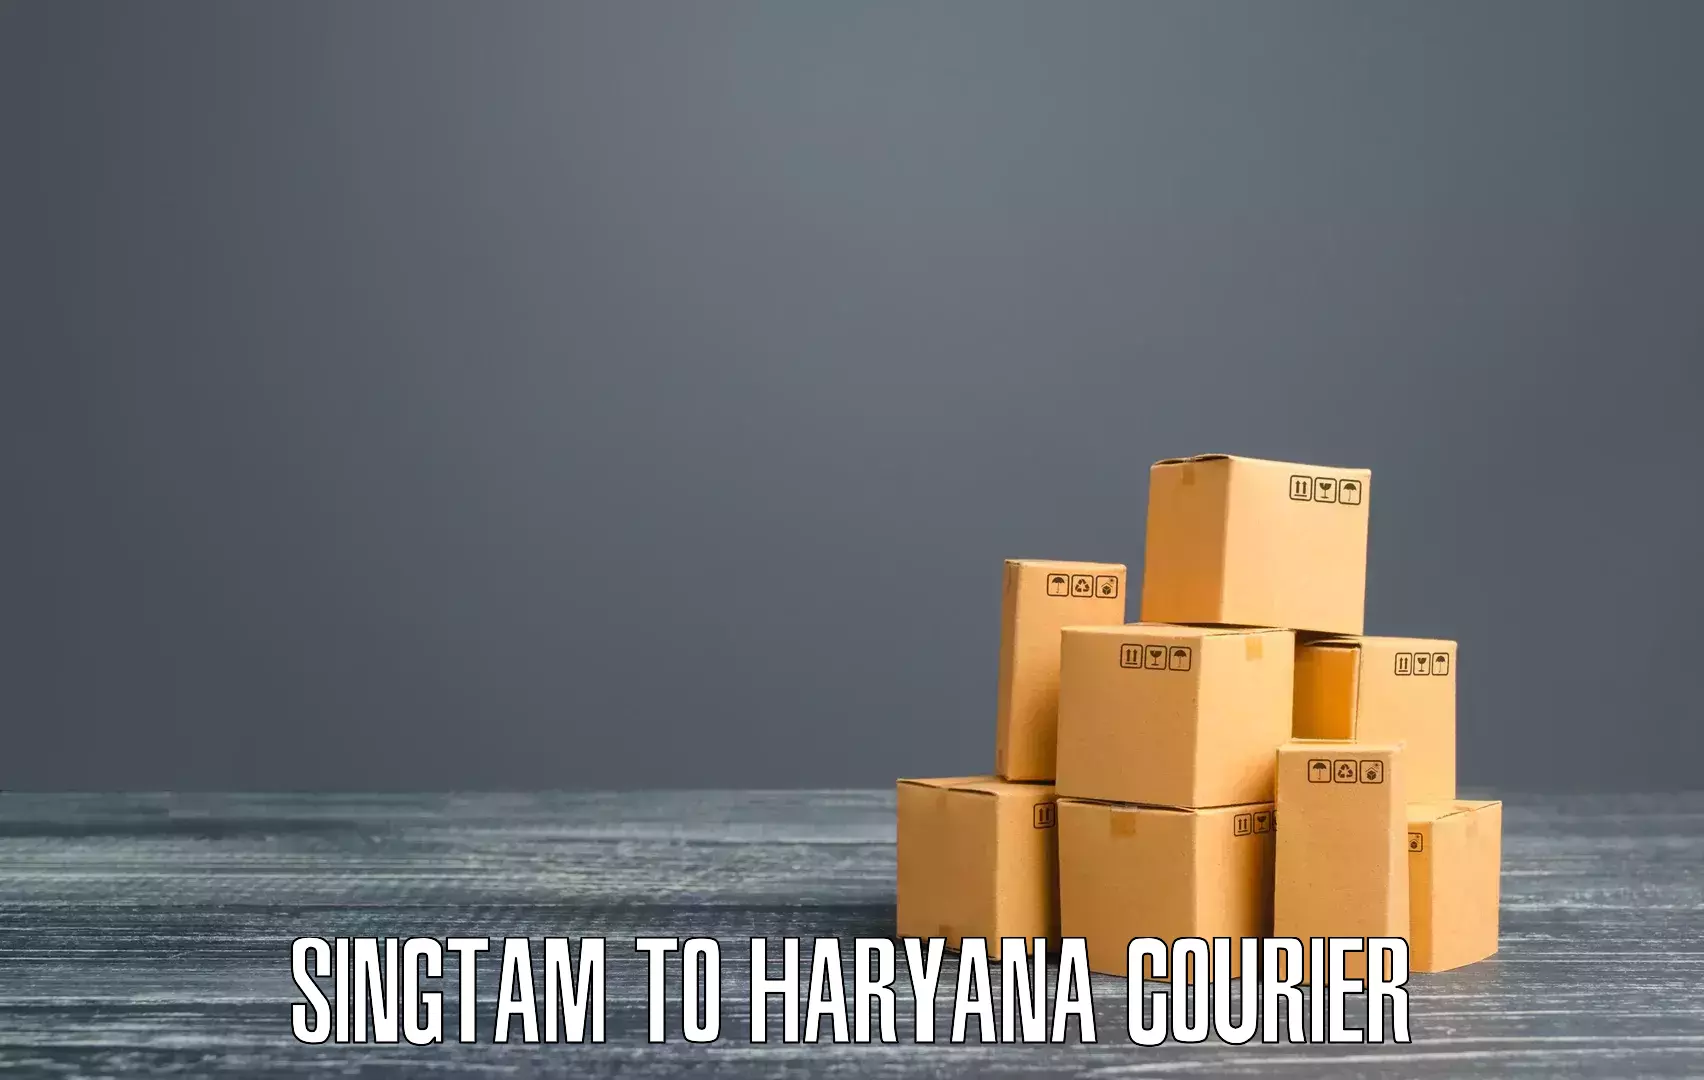 Reliable parcel services Singtam to Narwana